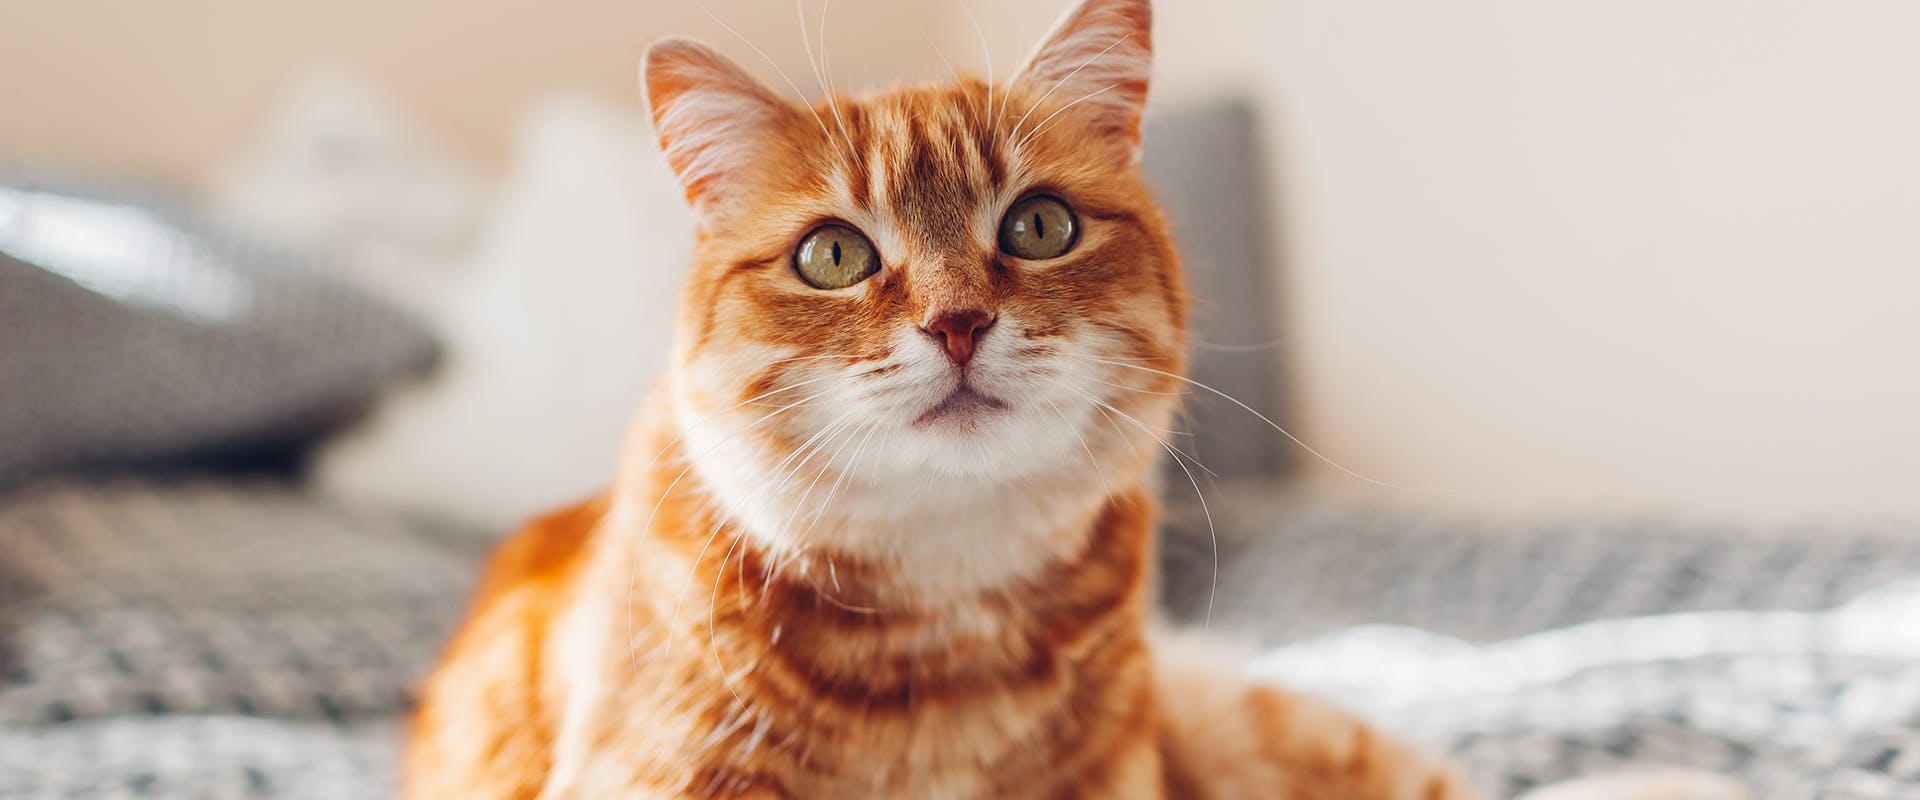 Popular cat names - a cute ginger and white cat